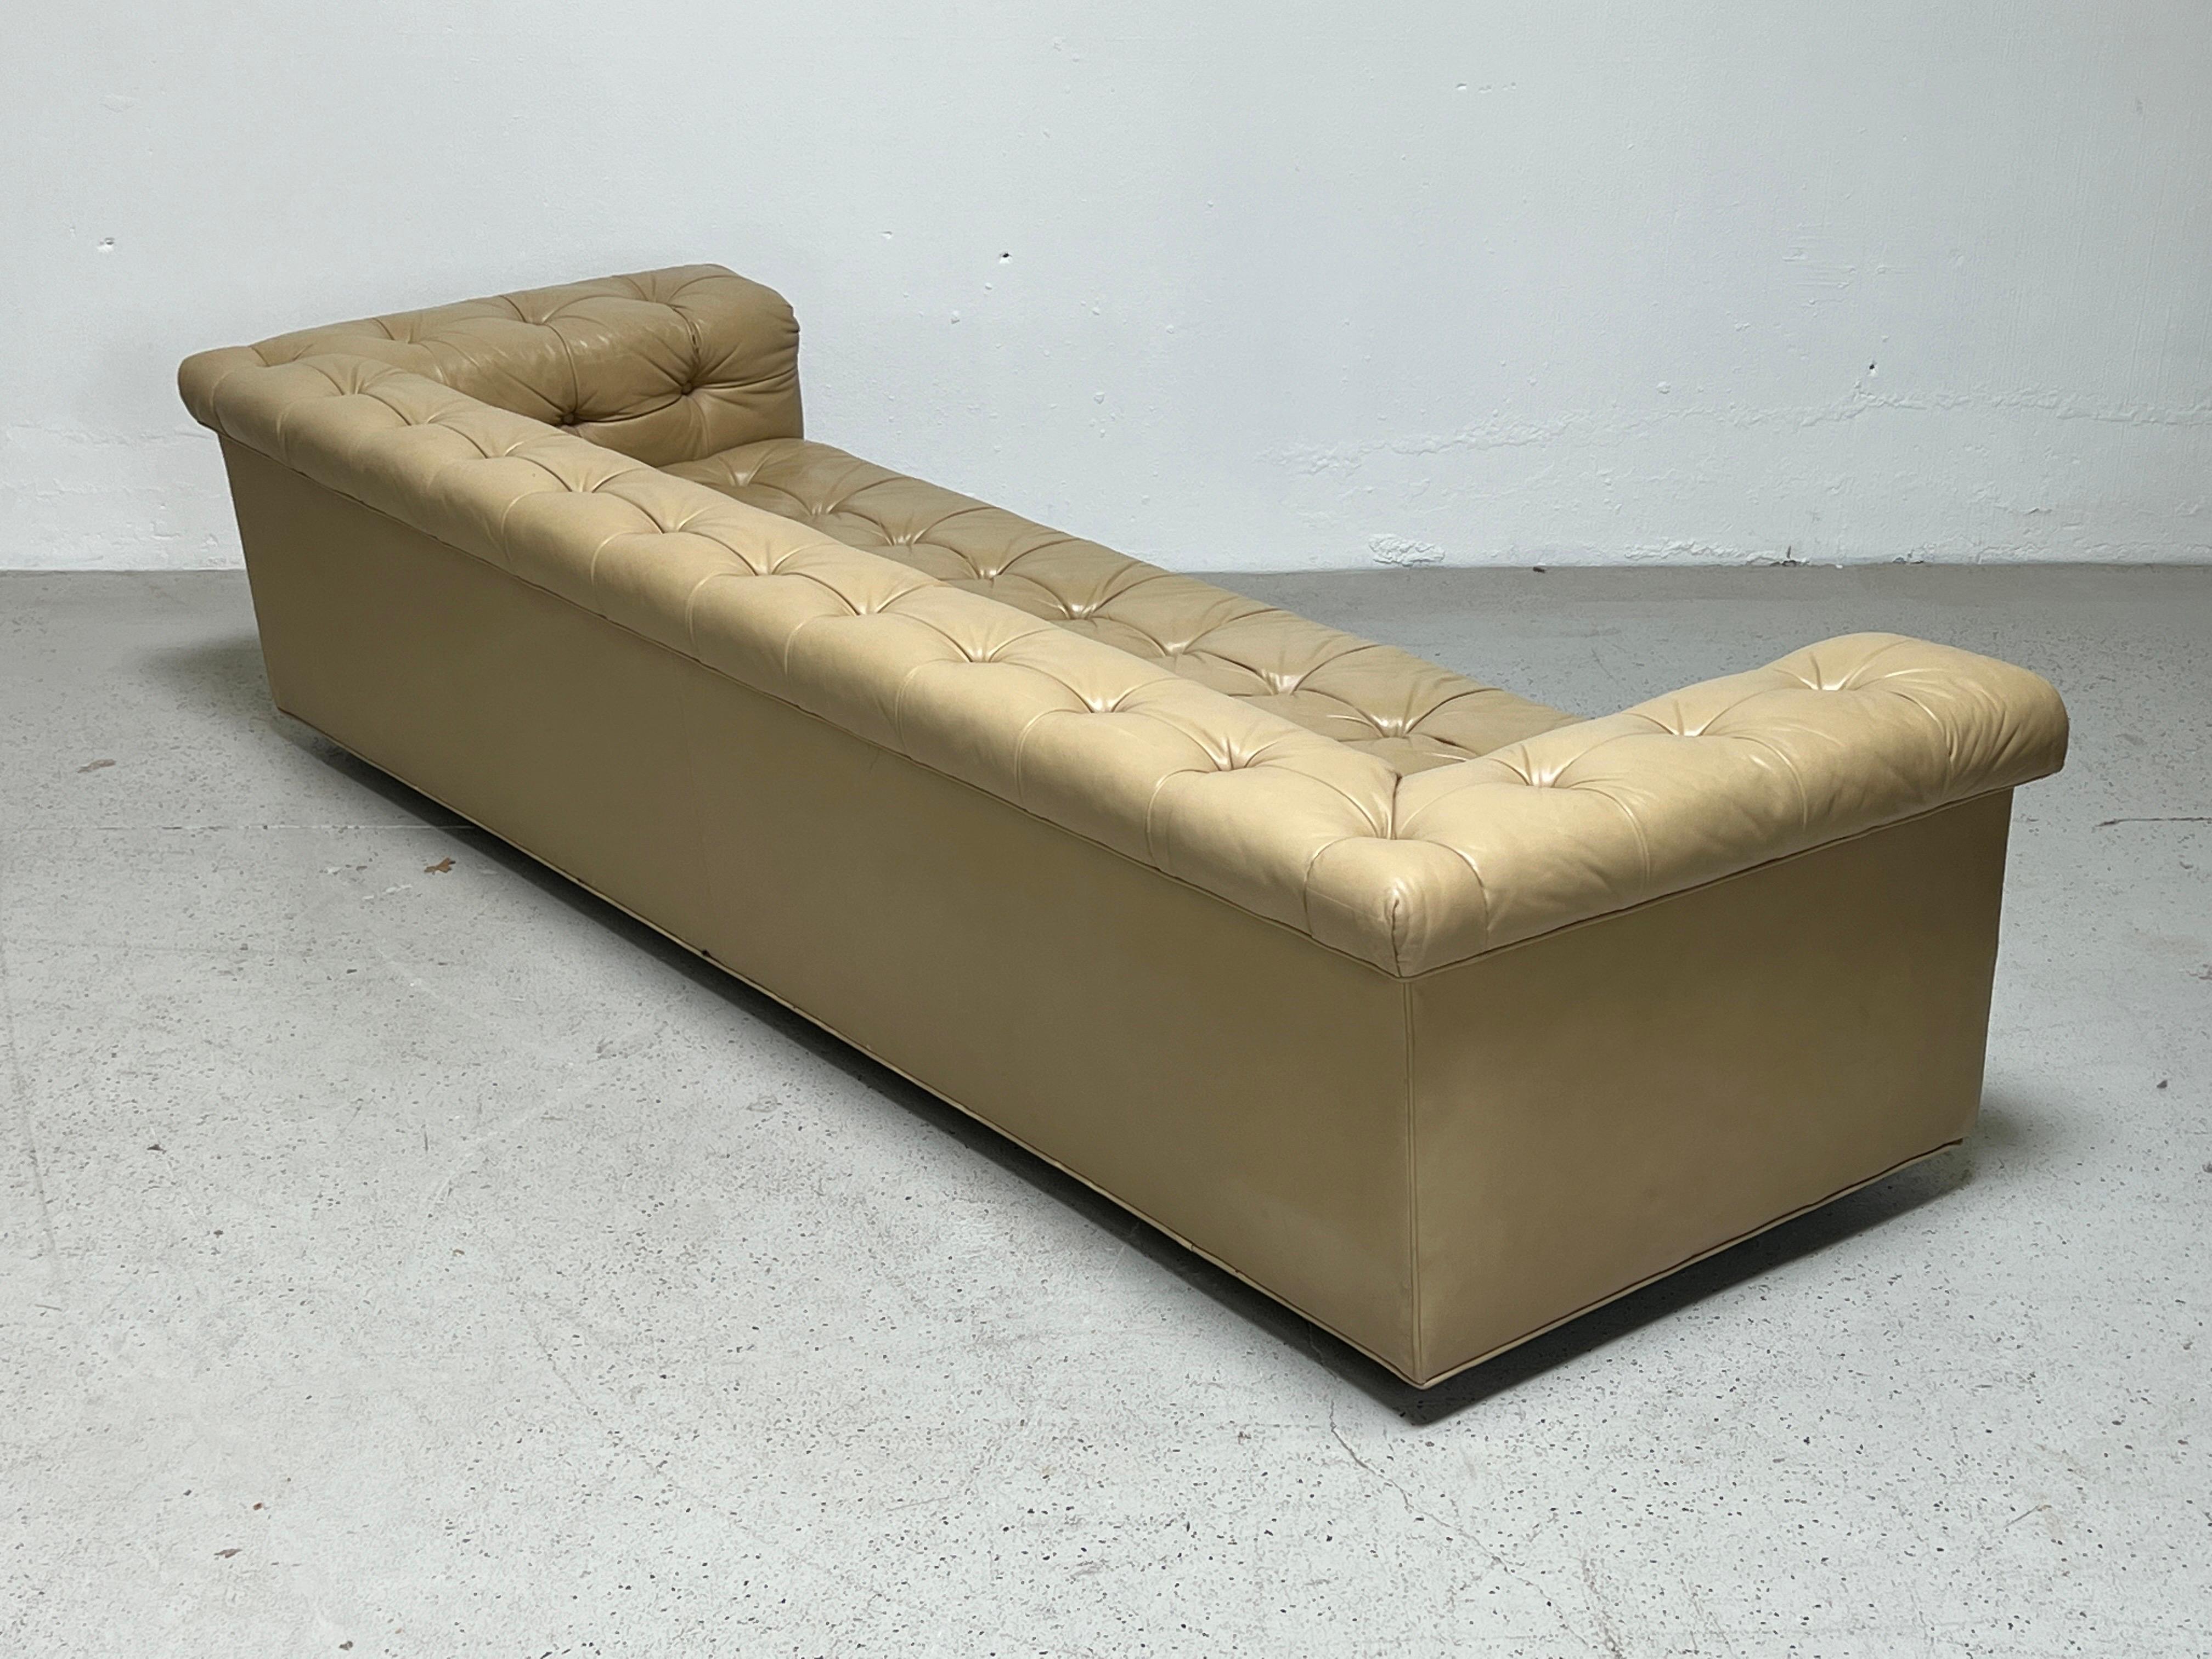 Pair of Party Sofas by Edward Wormley for Dunbar in Original Leather For Sale 7